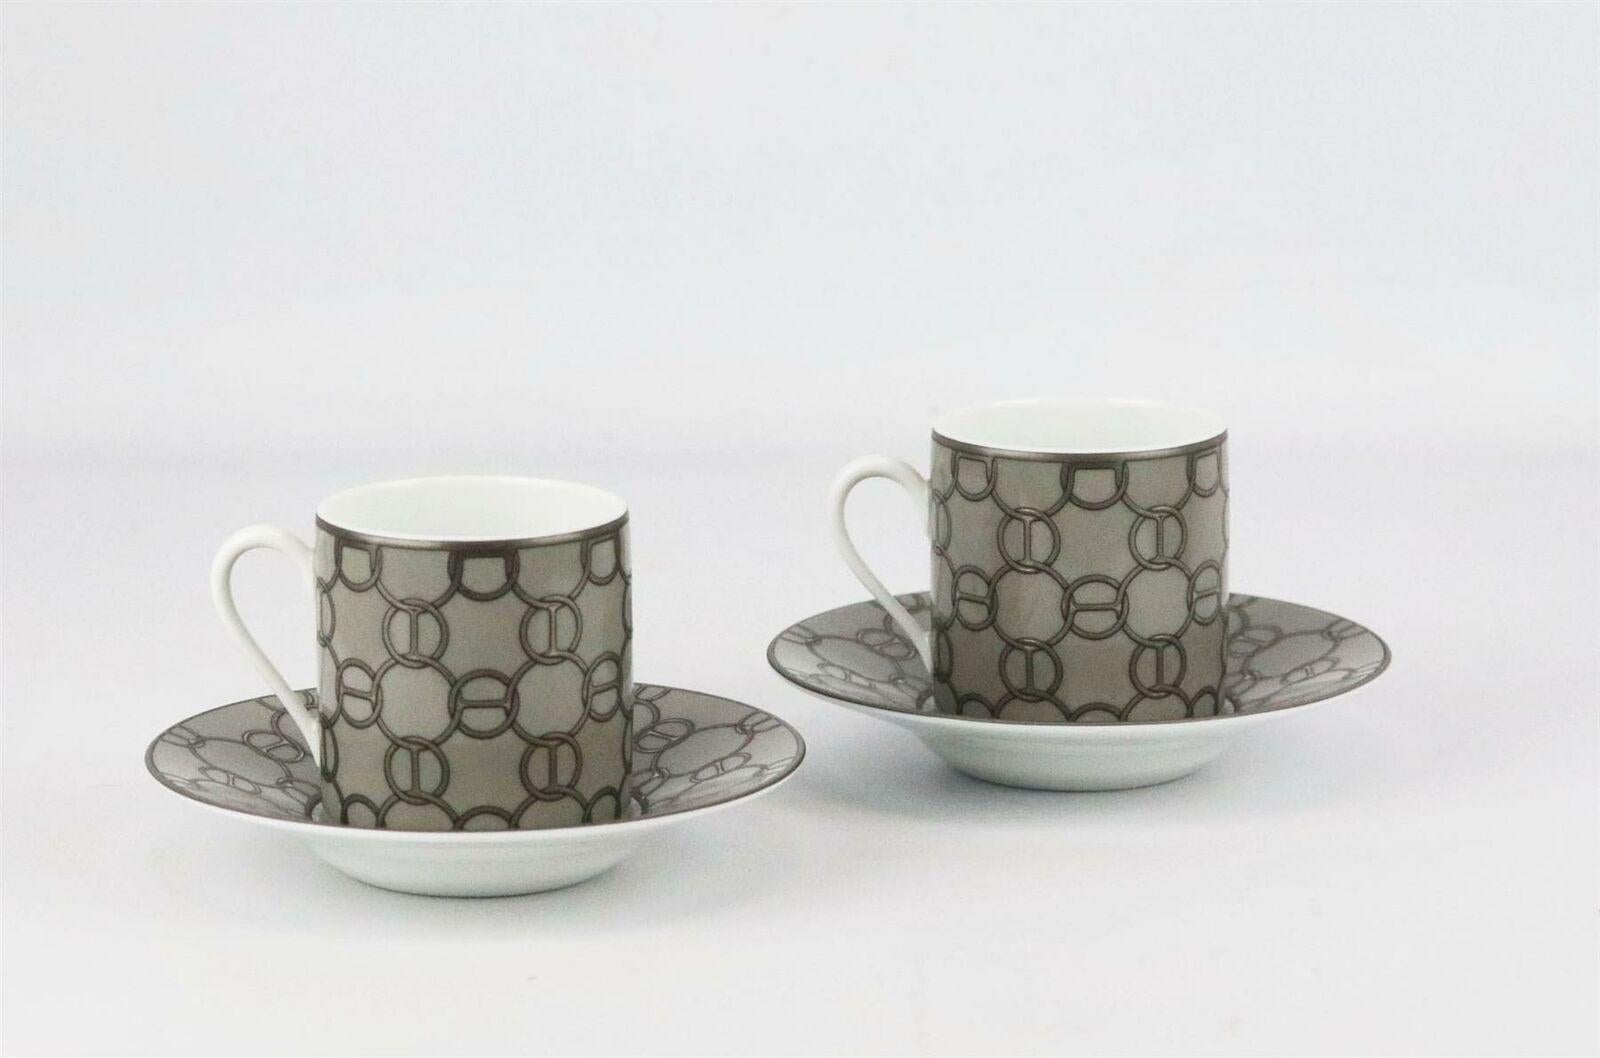 Set of 2 grey, silver and white porcelain Hermès Fil d’Argent coffee cup and matching saucer with chain-link design throughout, gilt accents and brand stamp on the bottom.
Does not come with box.

Dimensions: H 2.5 x D 2.25 inches.
Saucer: D 4.75